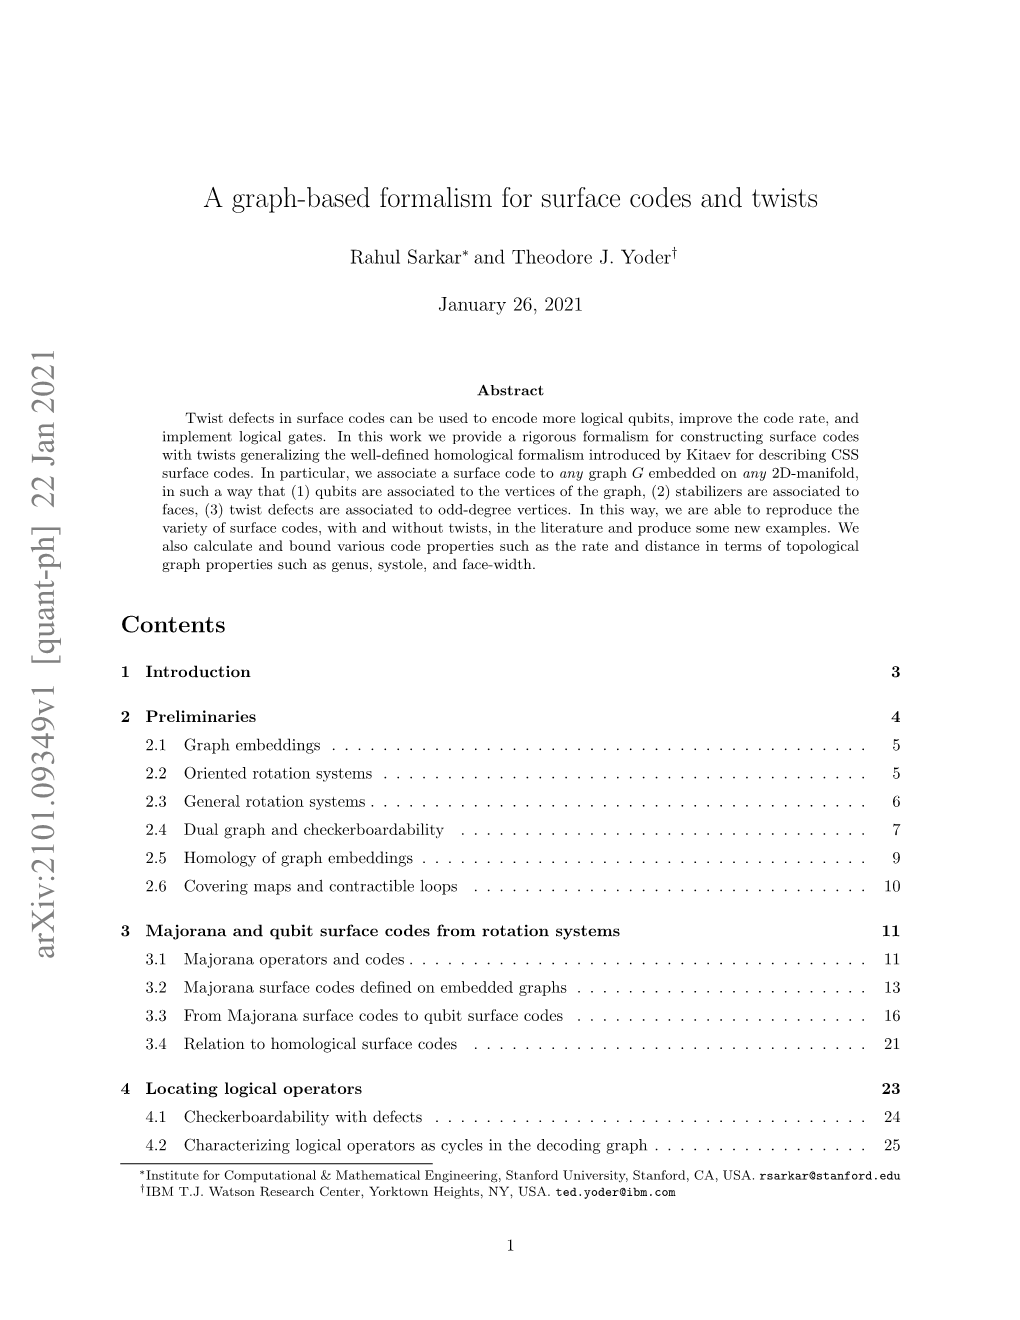 A Graph-Based Formalism for Surface Codes and Twists